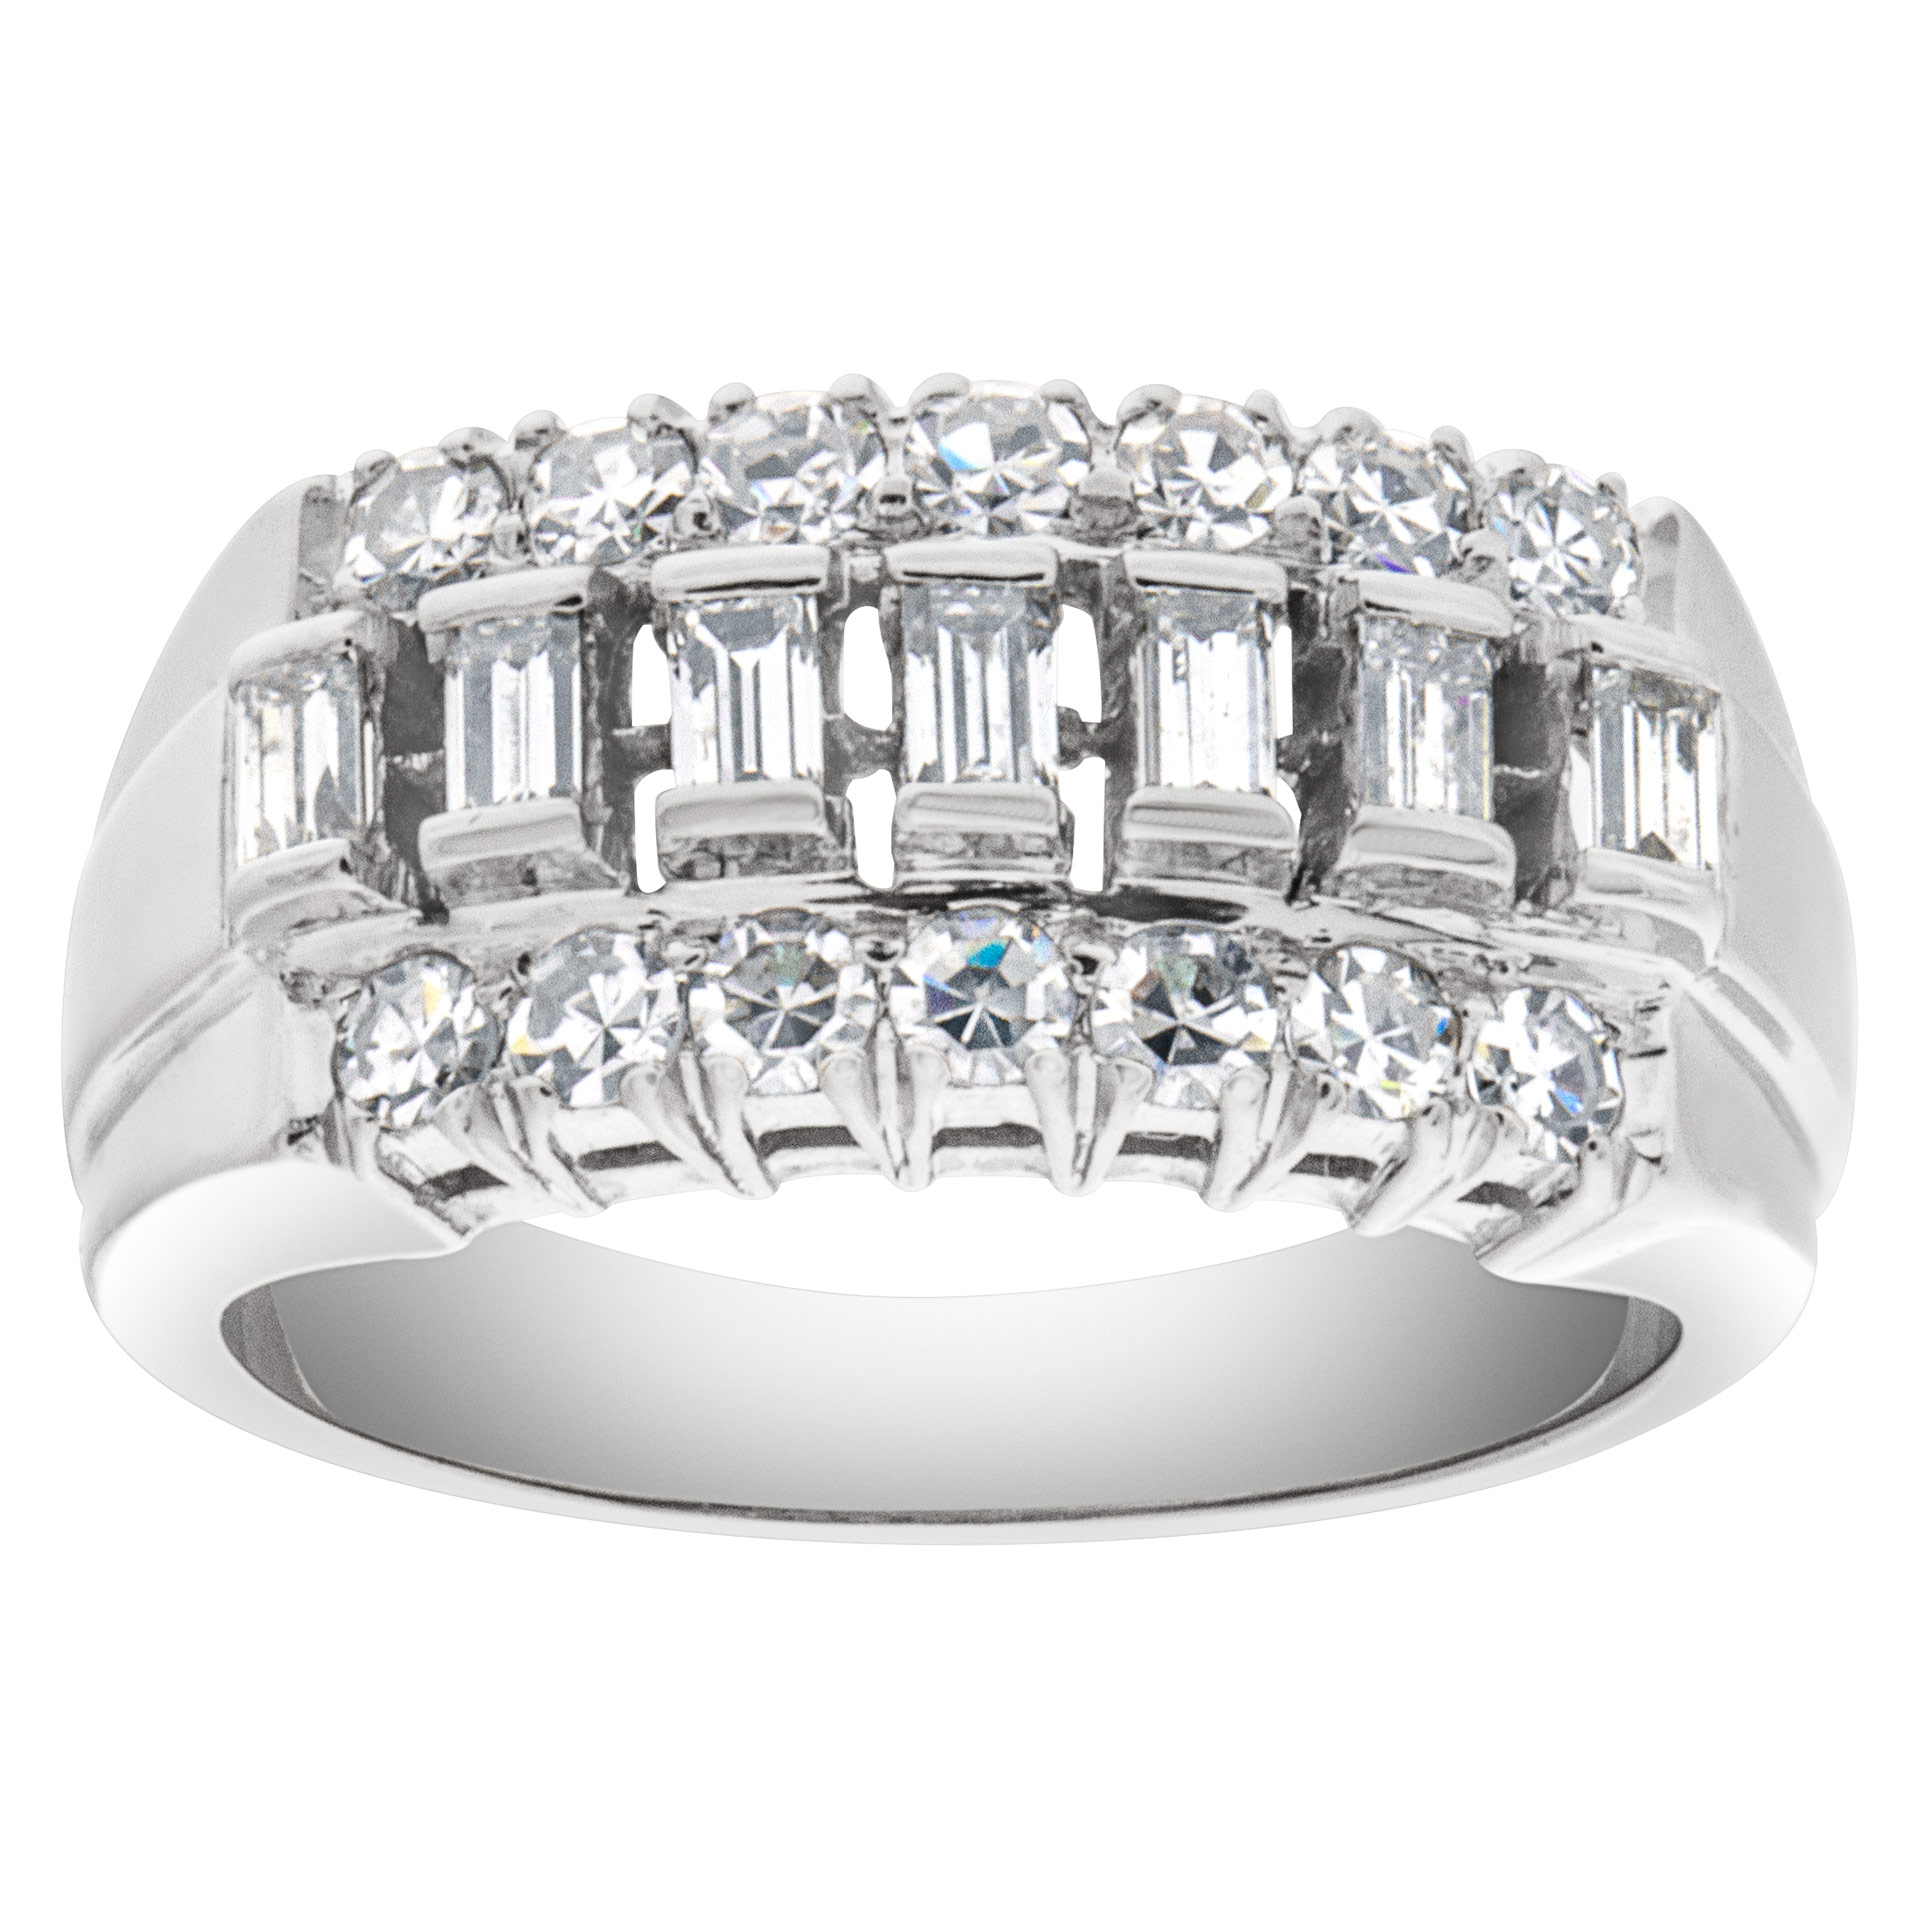 Vintage diamond pinky ring in 14k white gold with 0.65 carats in round & baguette diamonds image 1